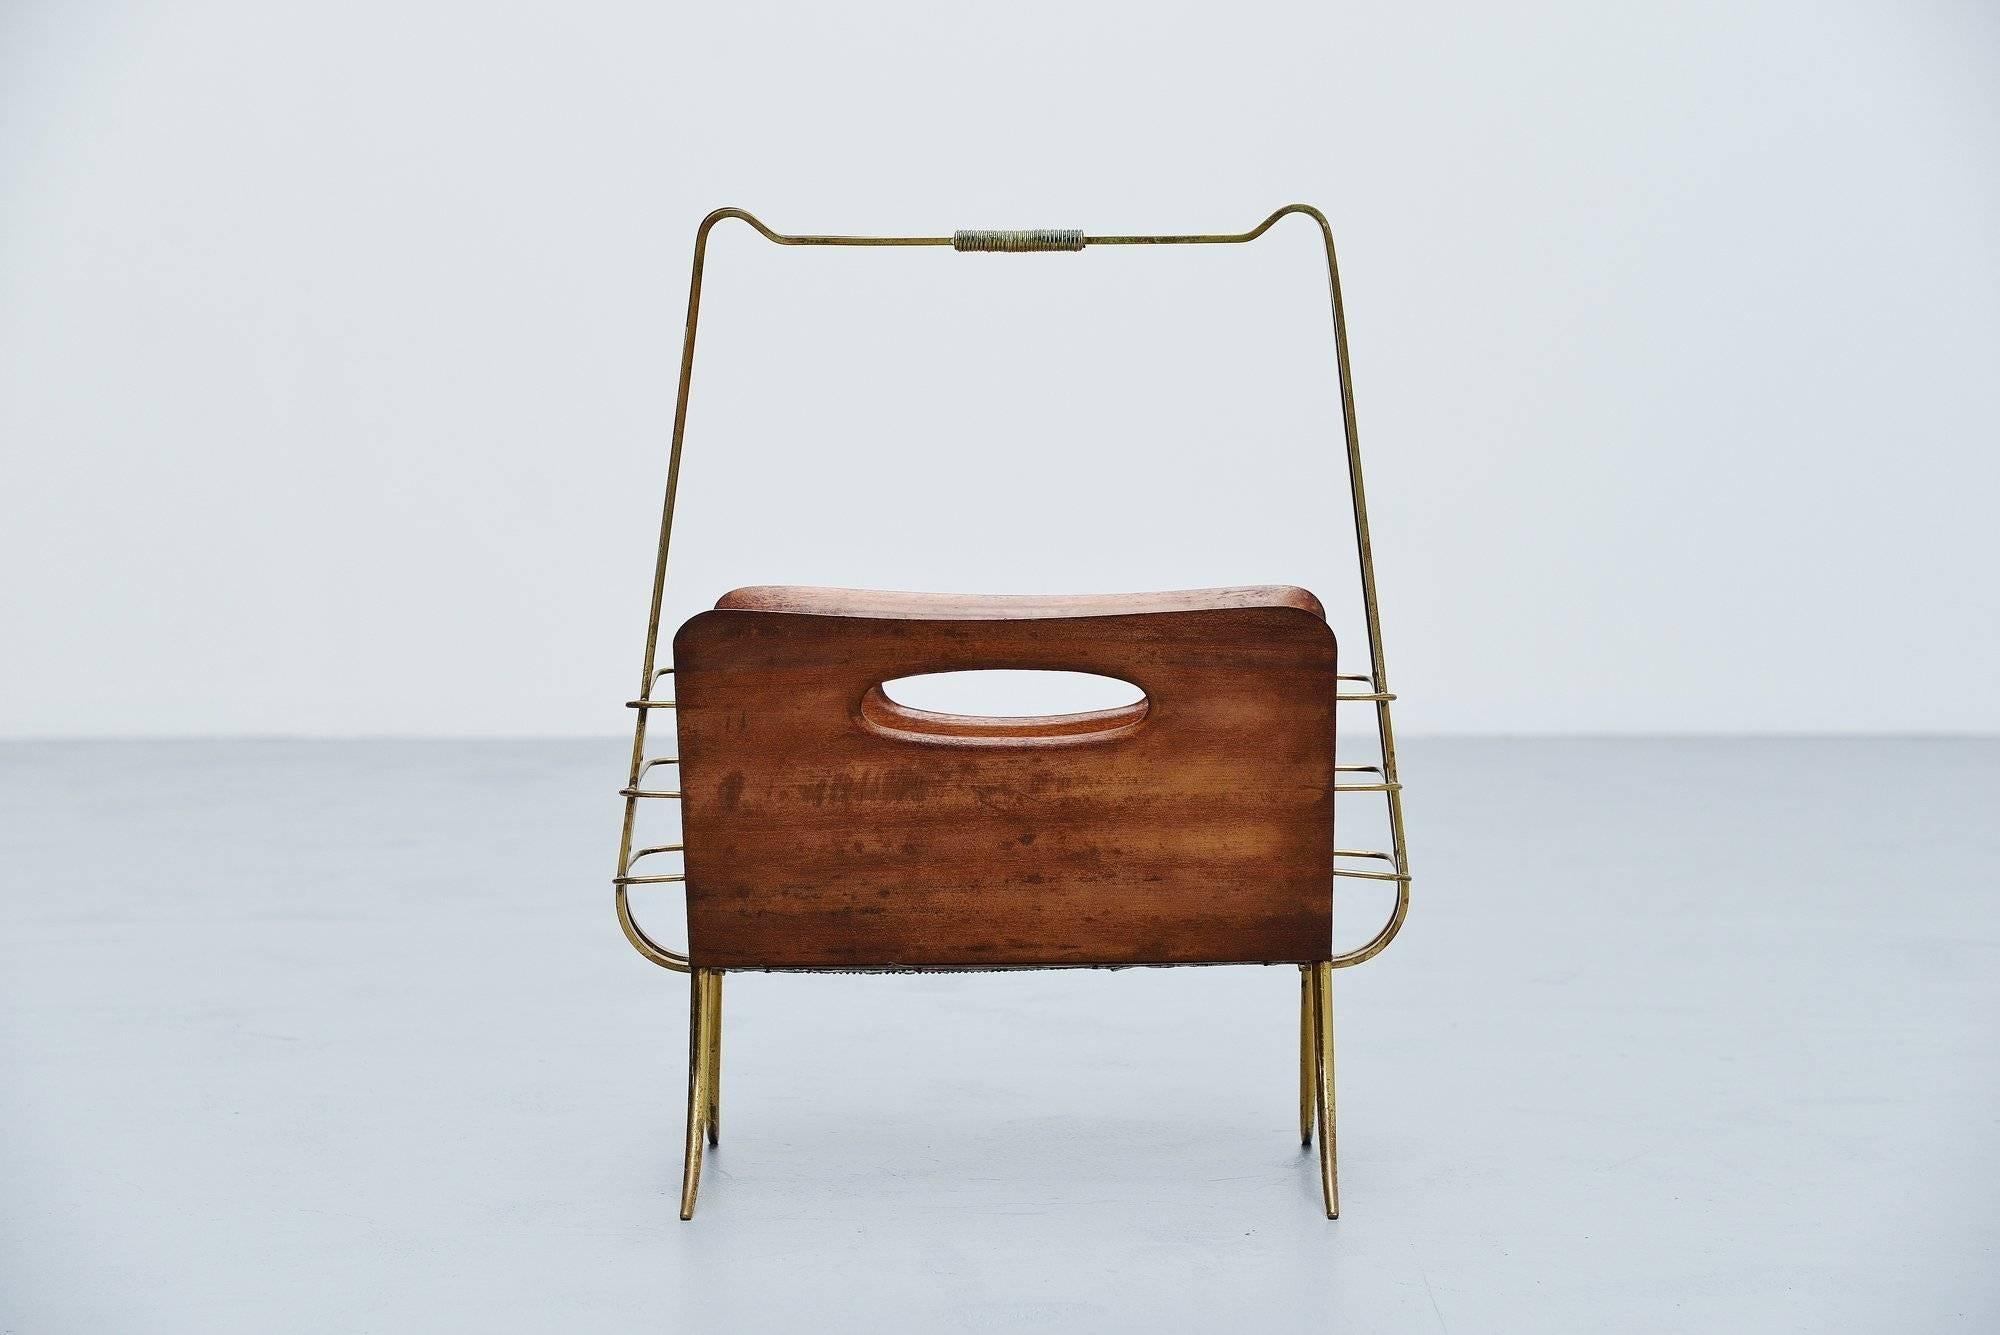 Very nicely shaped magazine rack in the style of Ico Parisi, made in Italy, 1950. This rack was made of solid brass and organic shaped teak wood. The piece is in good original condition and the shape of this is amazing ofcourse. Very nice and